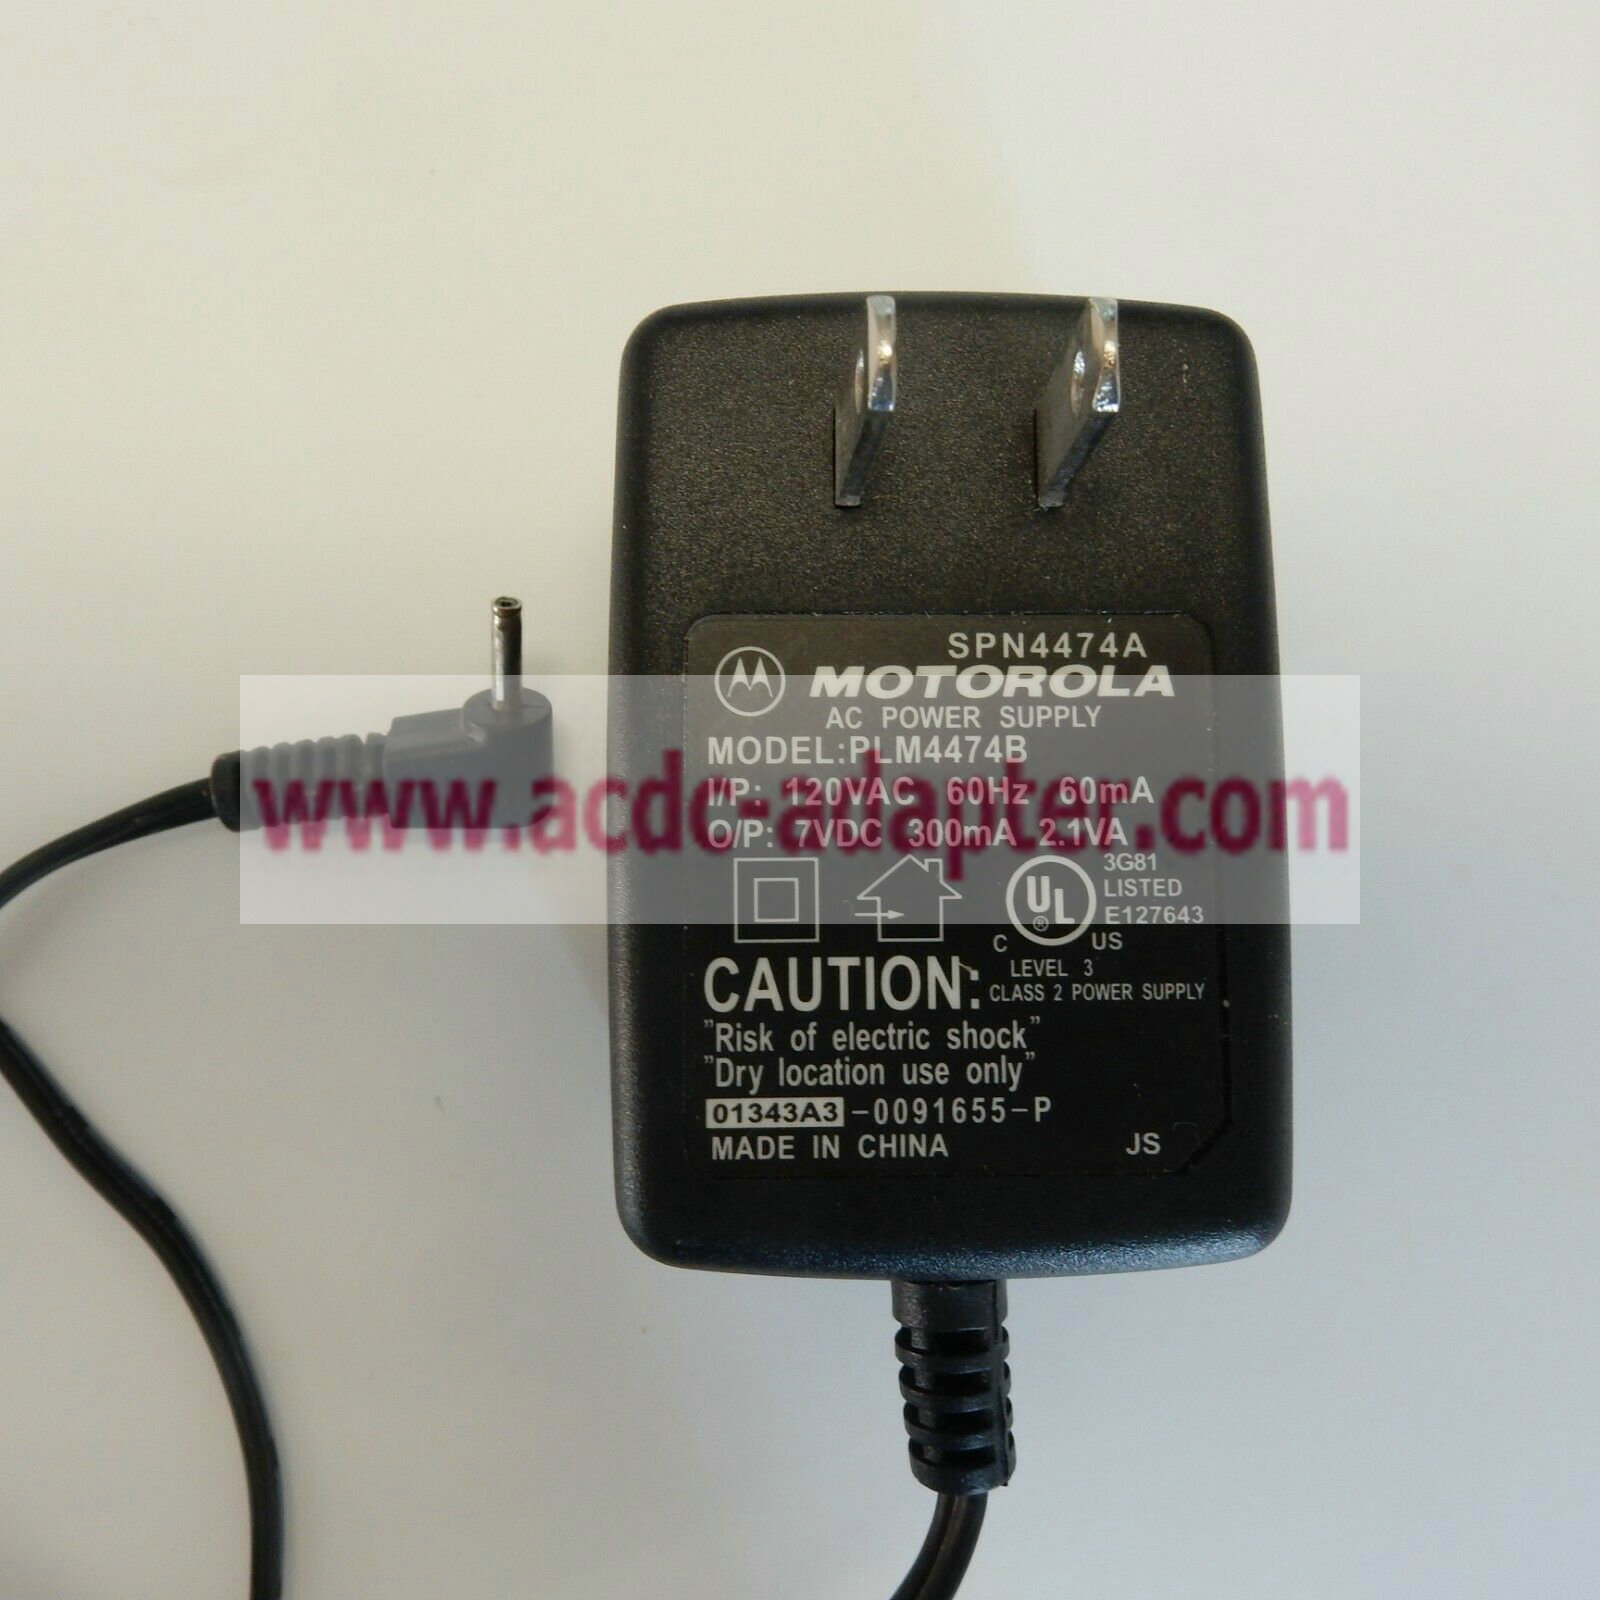 New Motorola PLM4474B Power Supply Charger 7VDC 300mA AC/DC Adapter for Cellphone - Click Image to Close